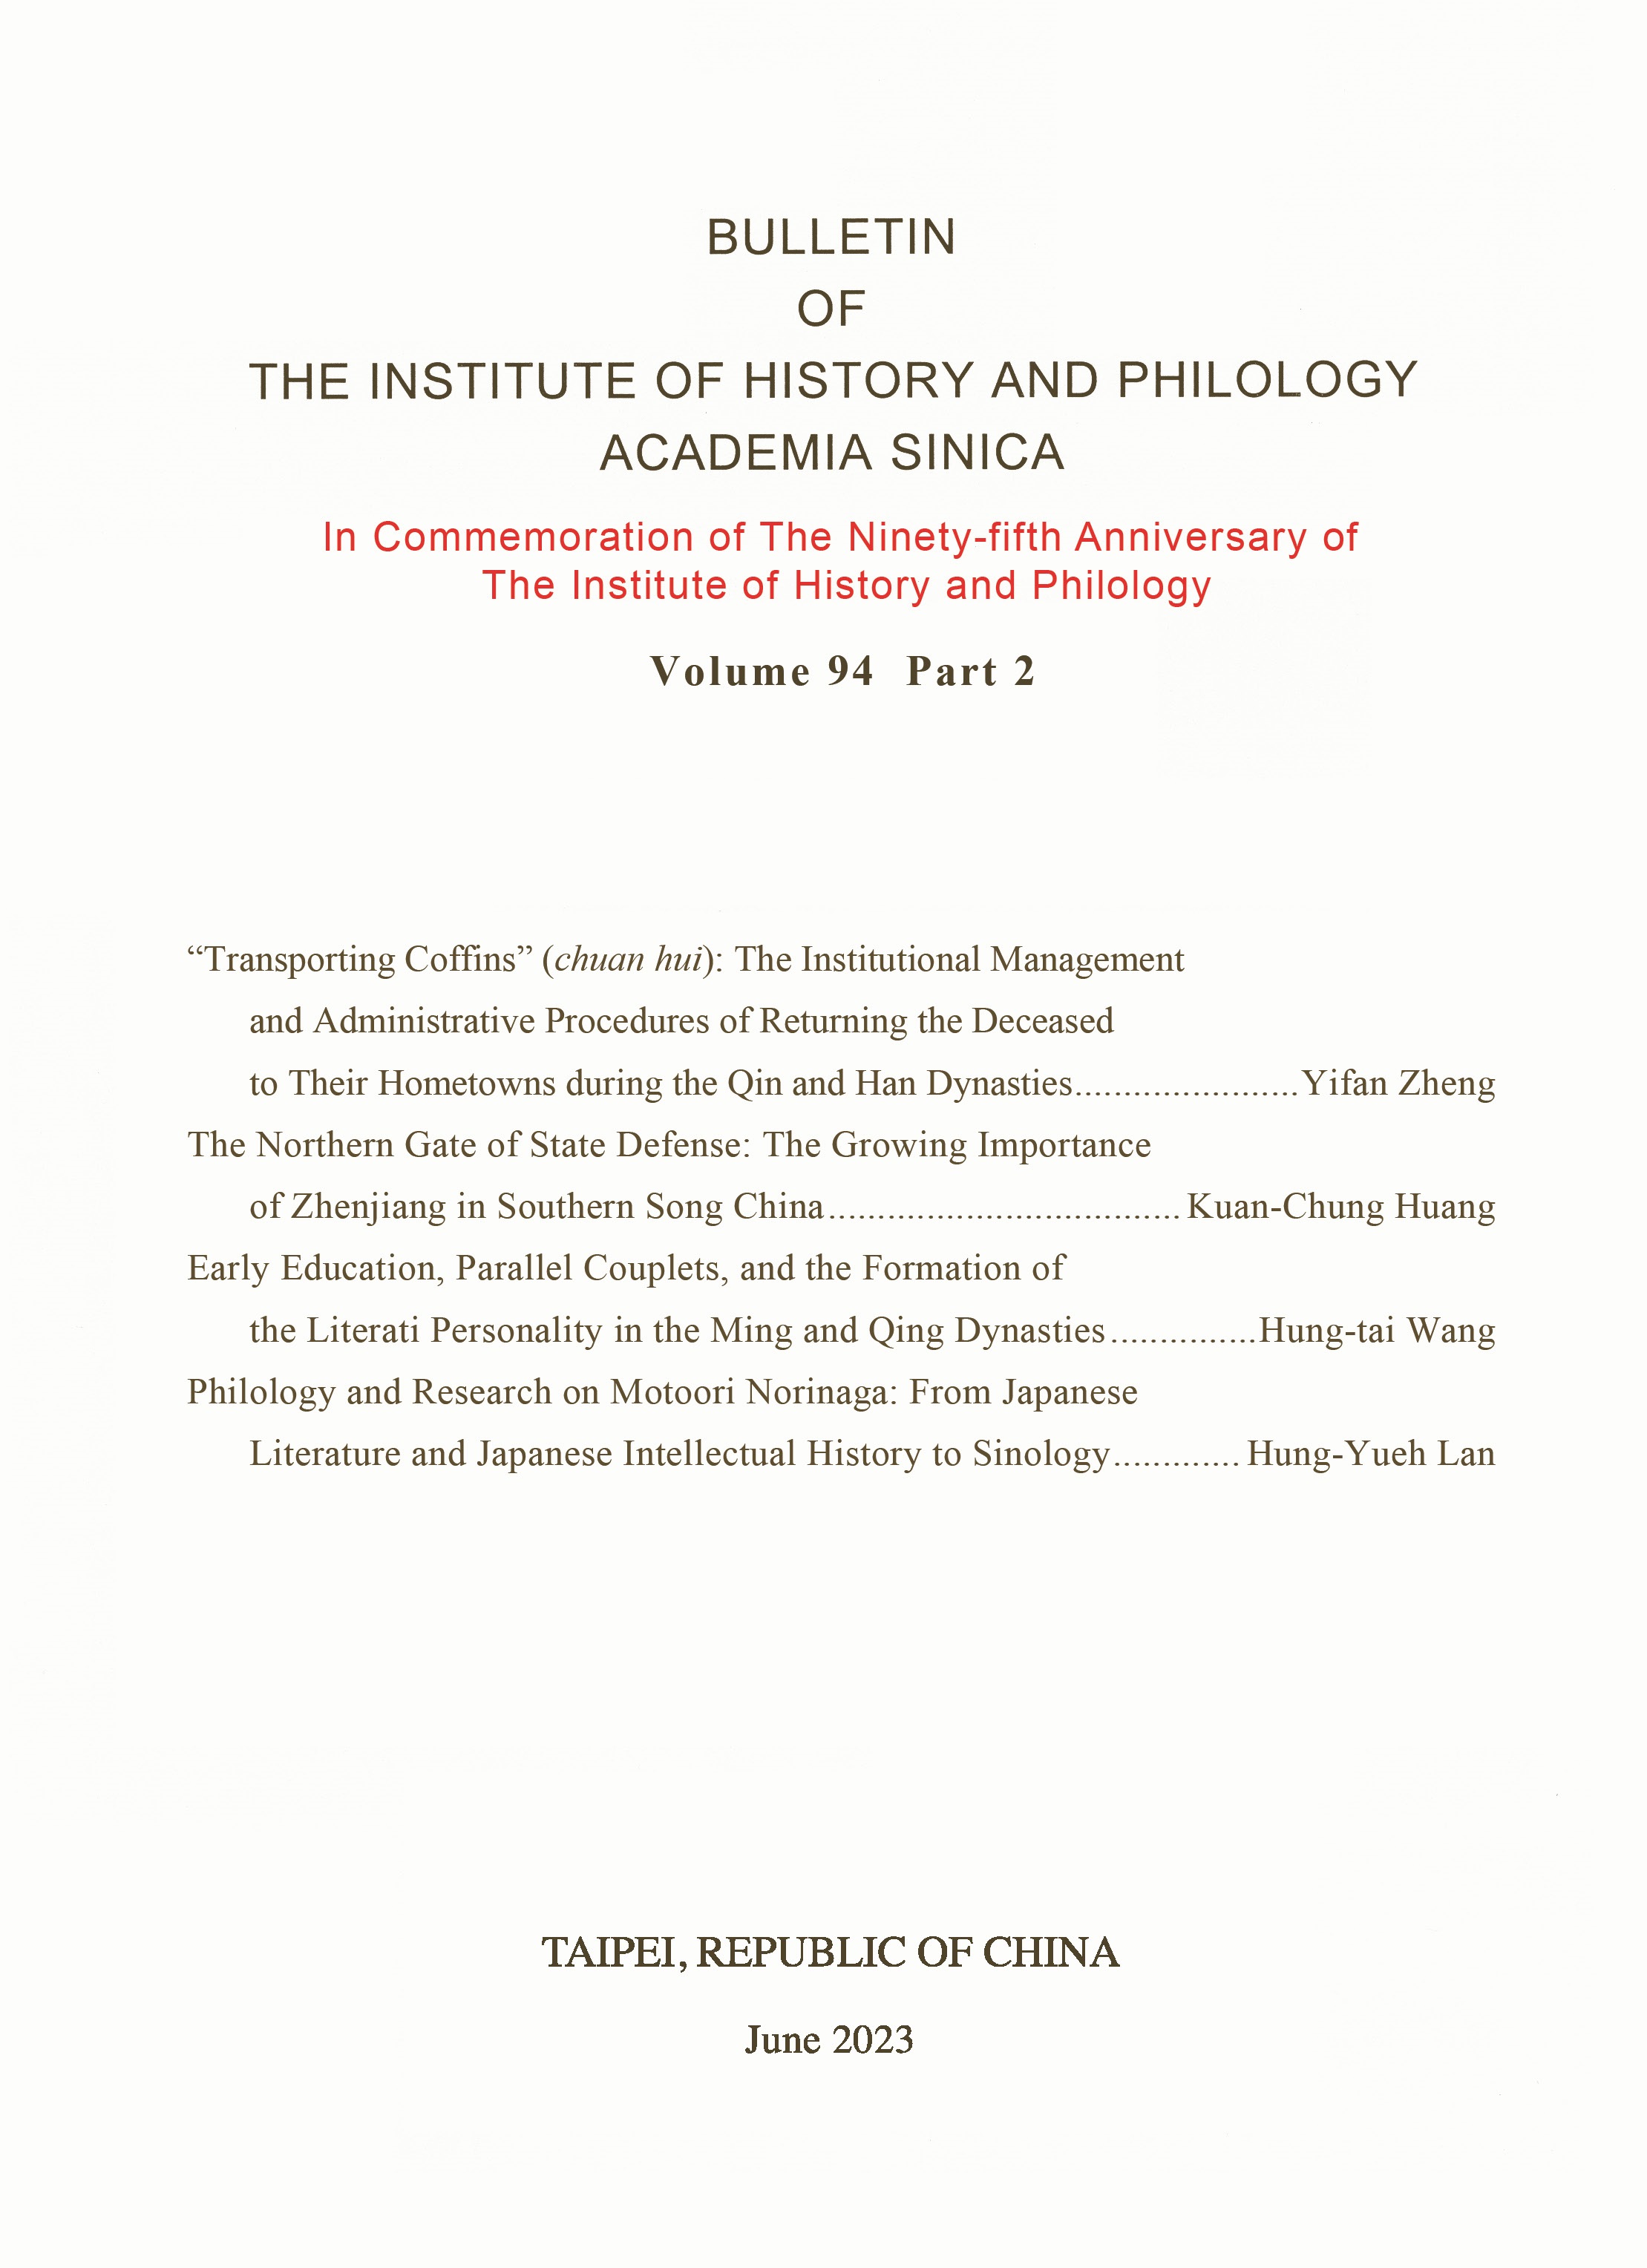 Bulletin of the Institute of History and Philology, Academia Sinica, Volume 94 Part 2